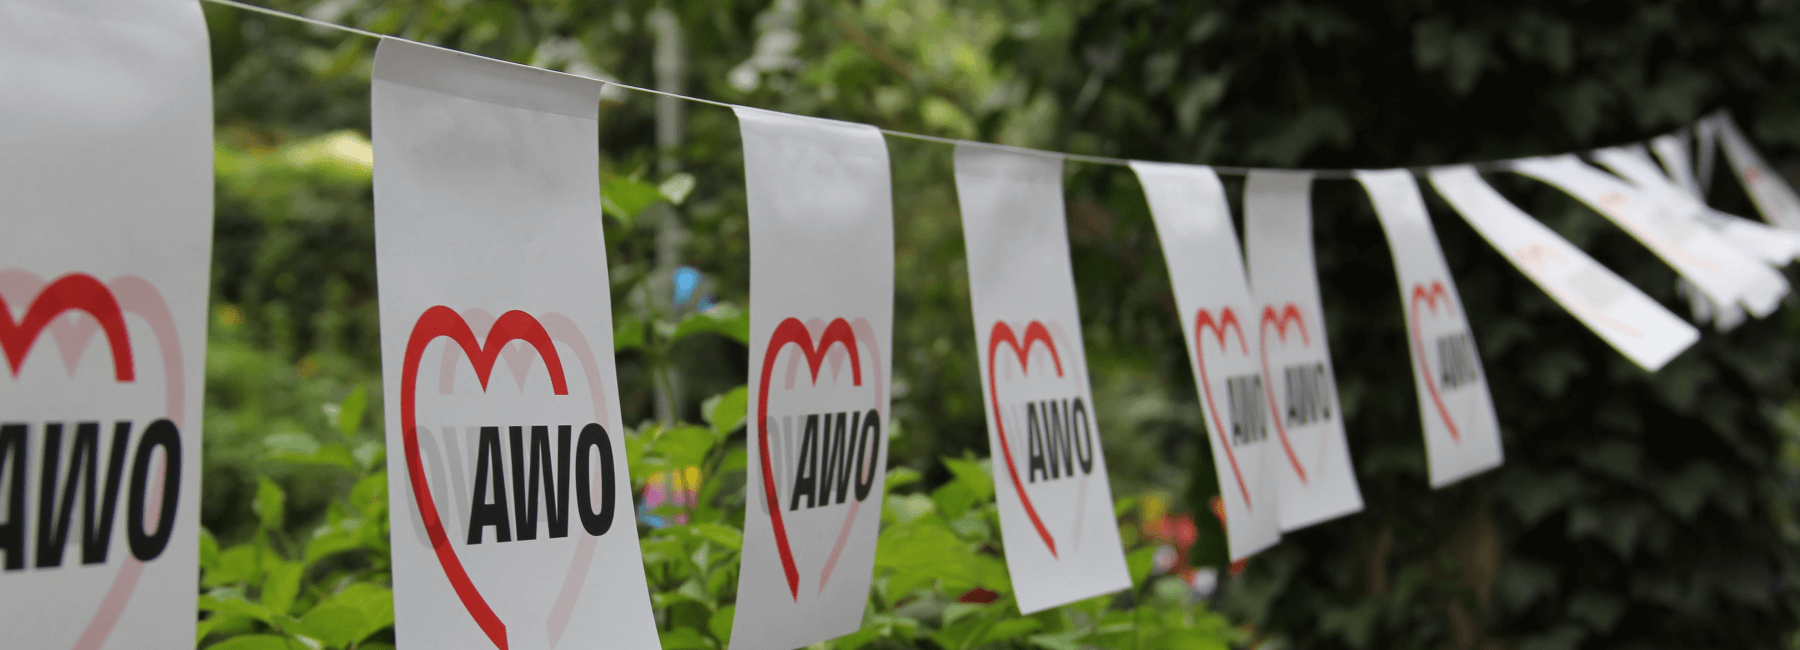 Row of white flags with AWO Berlin-Mitte logo on them wave in the wind with some green shrubbery behind it.